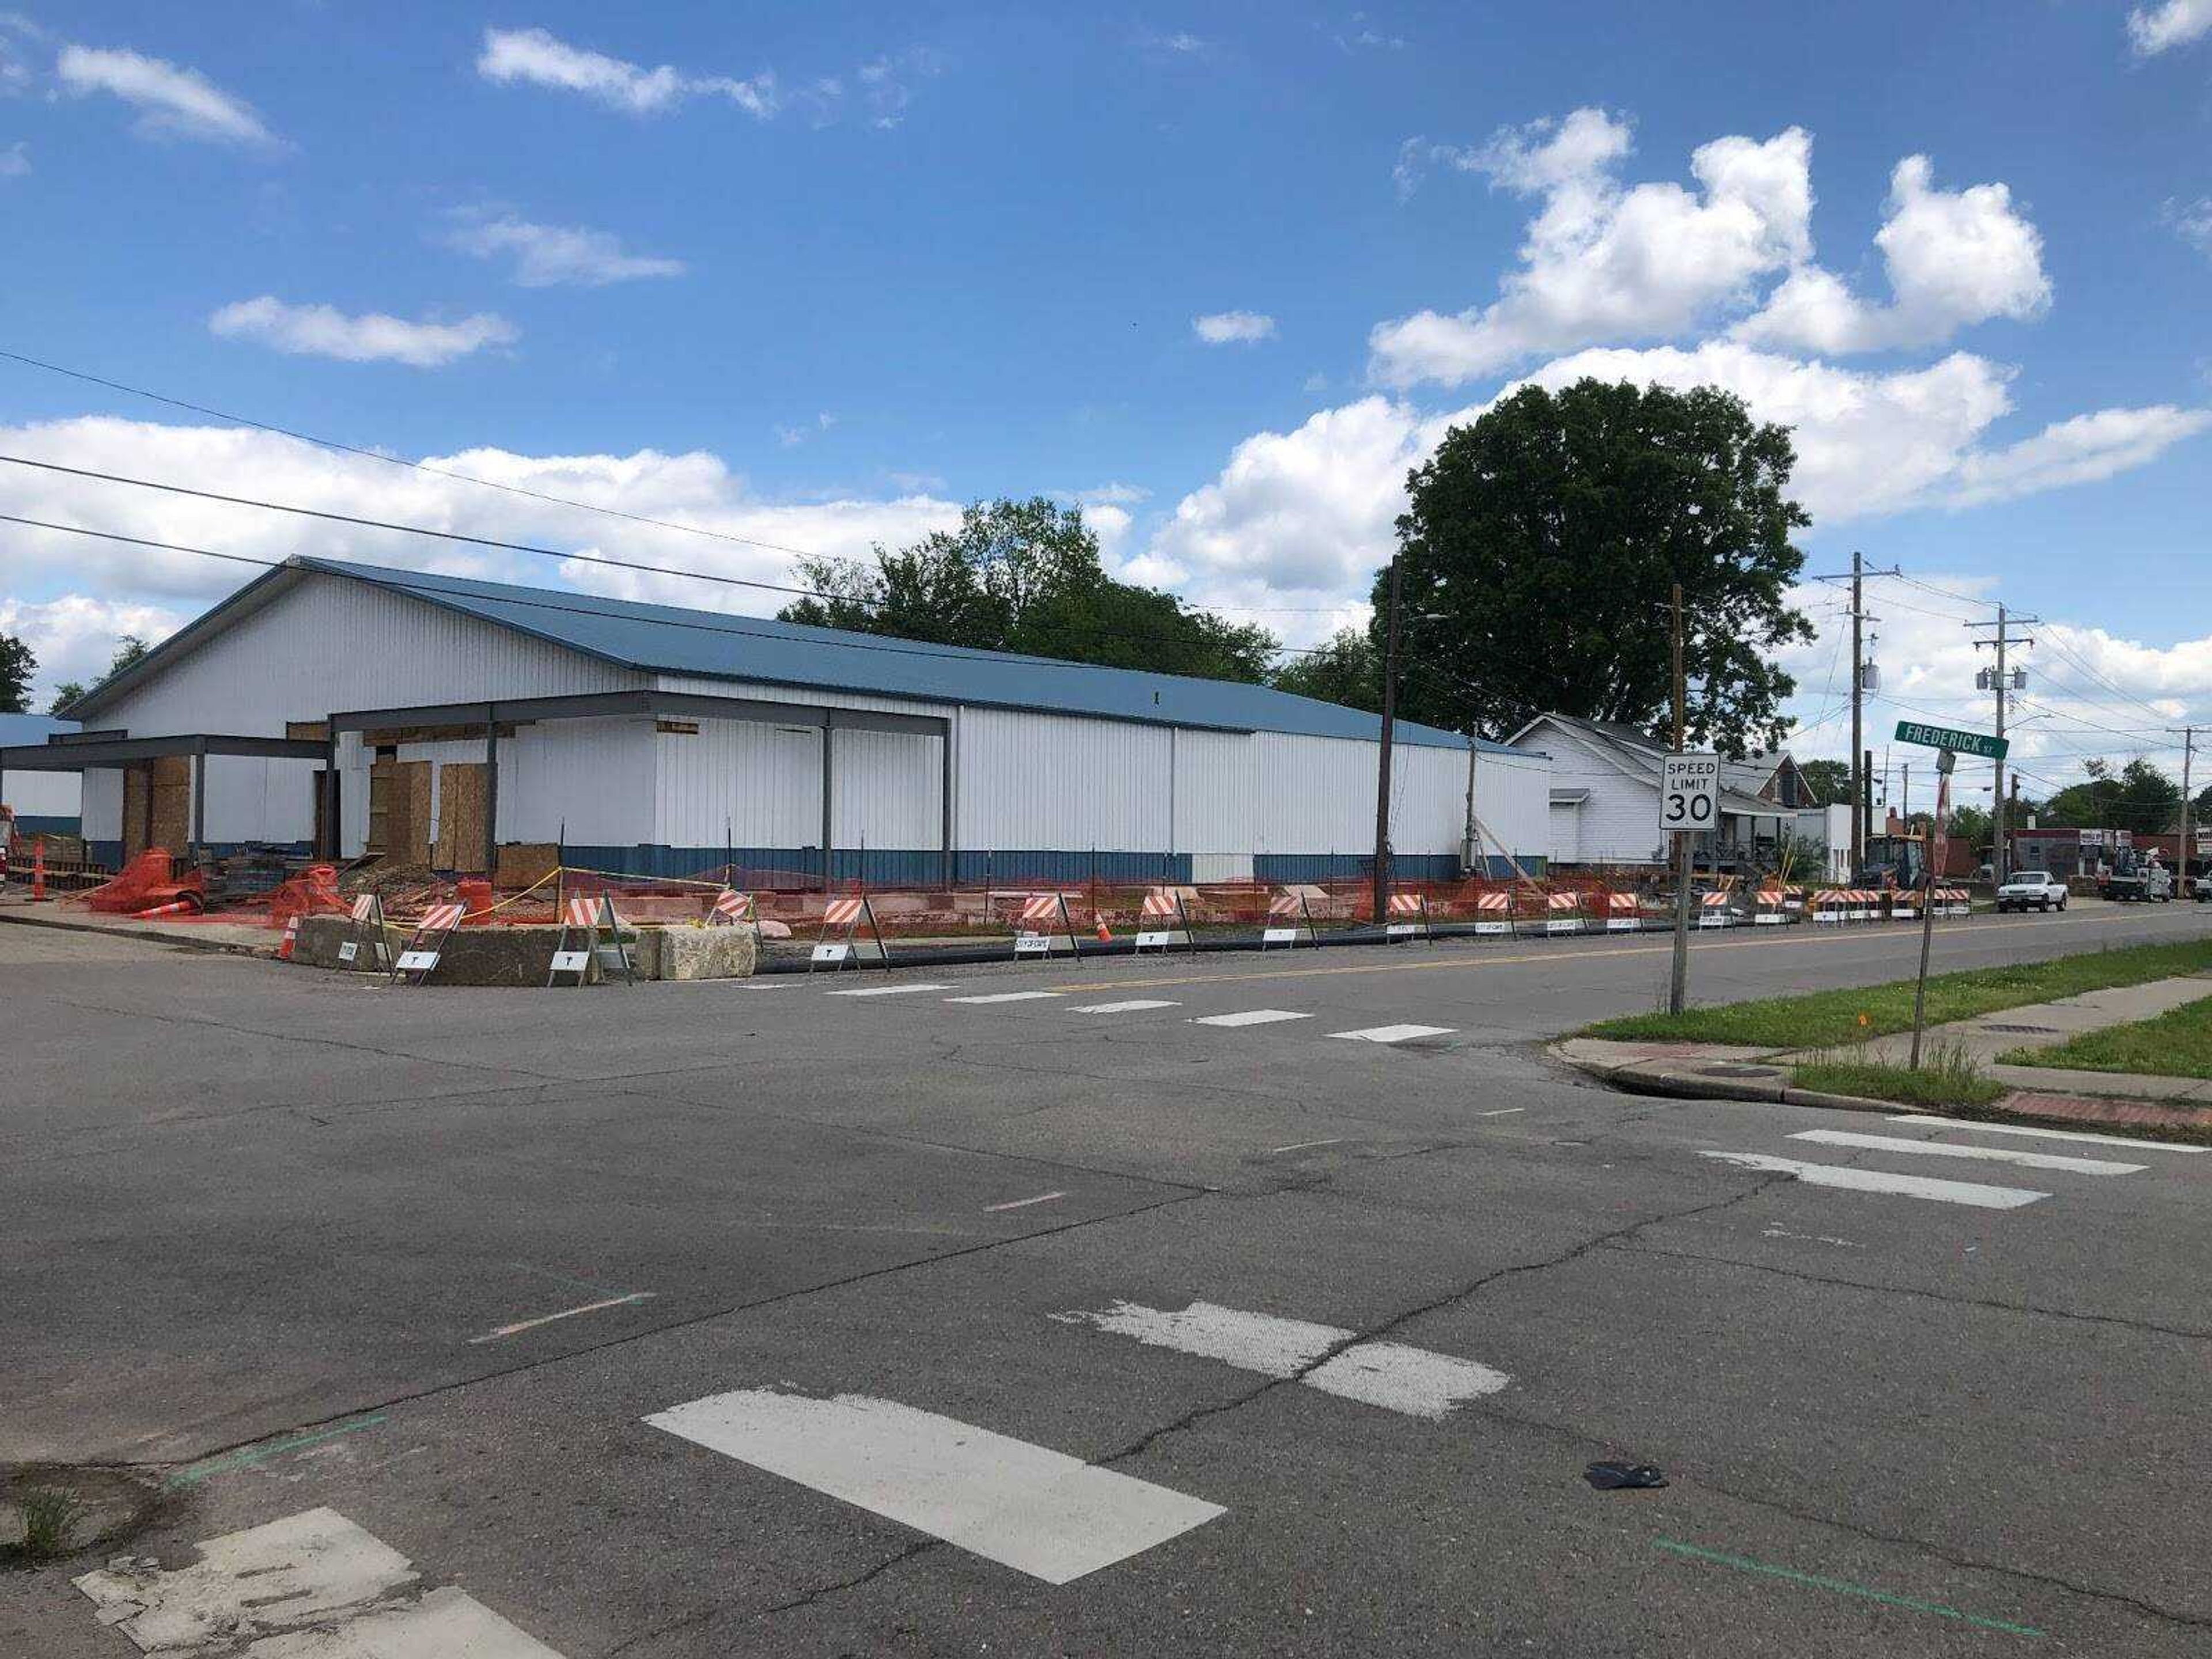 The building at 340 S. Frederick St. in Cape Girardeau is currently under construction as part of the new River Campus expansion project and will hold some of the “dirty arts” programs like ceramics. From the building to the River Campus, it is approximately a two-minute drive.